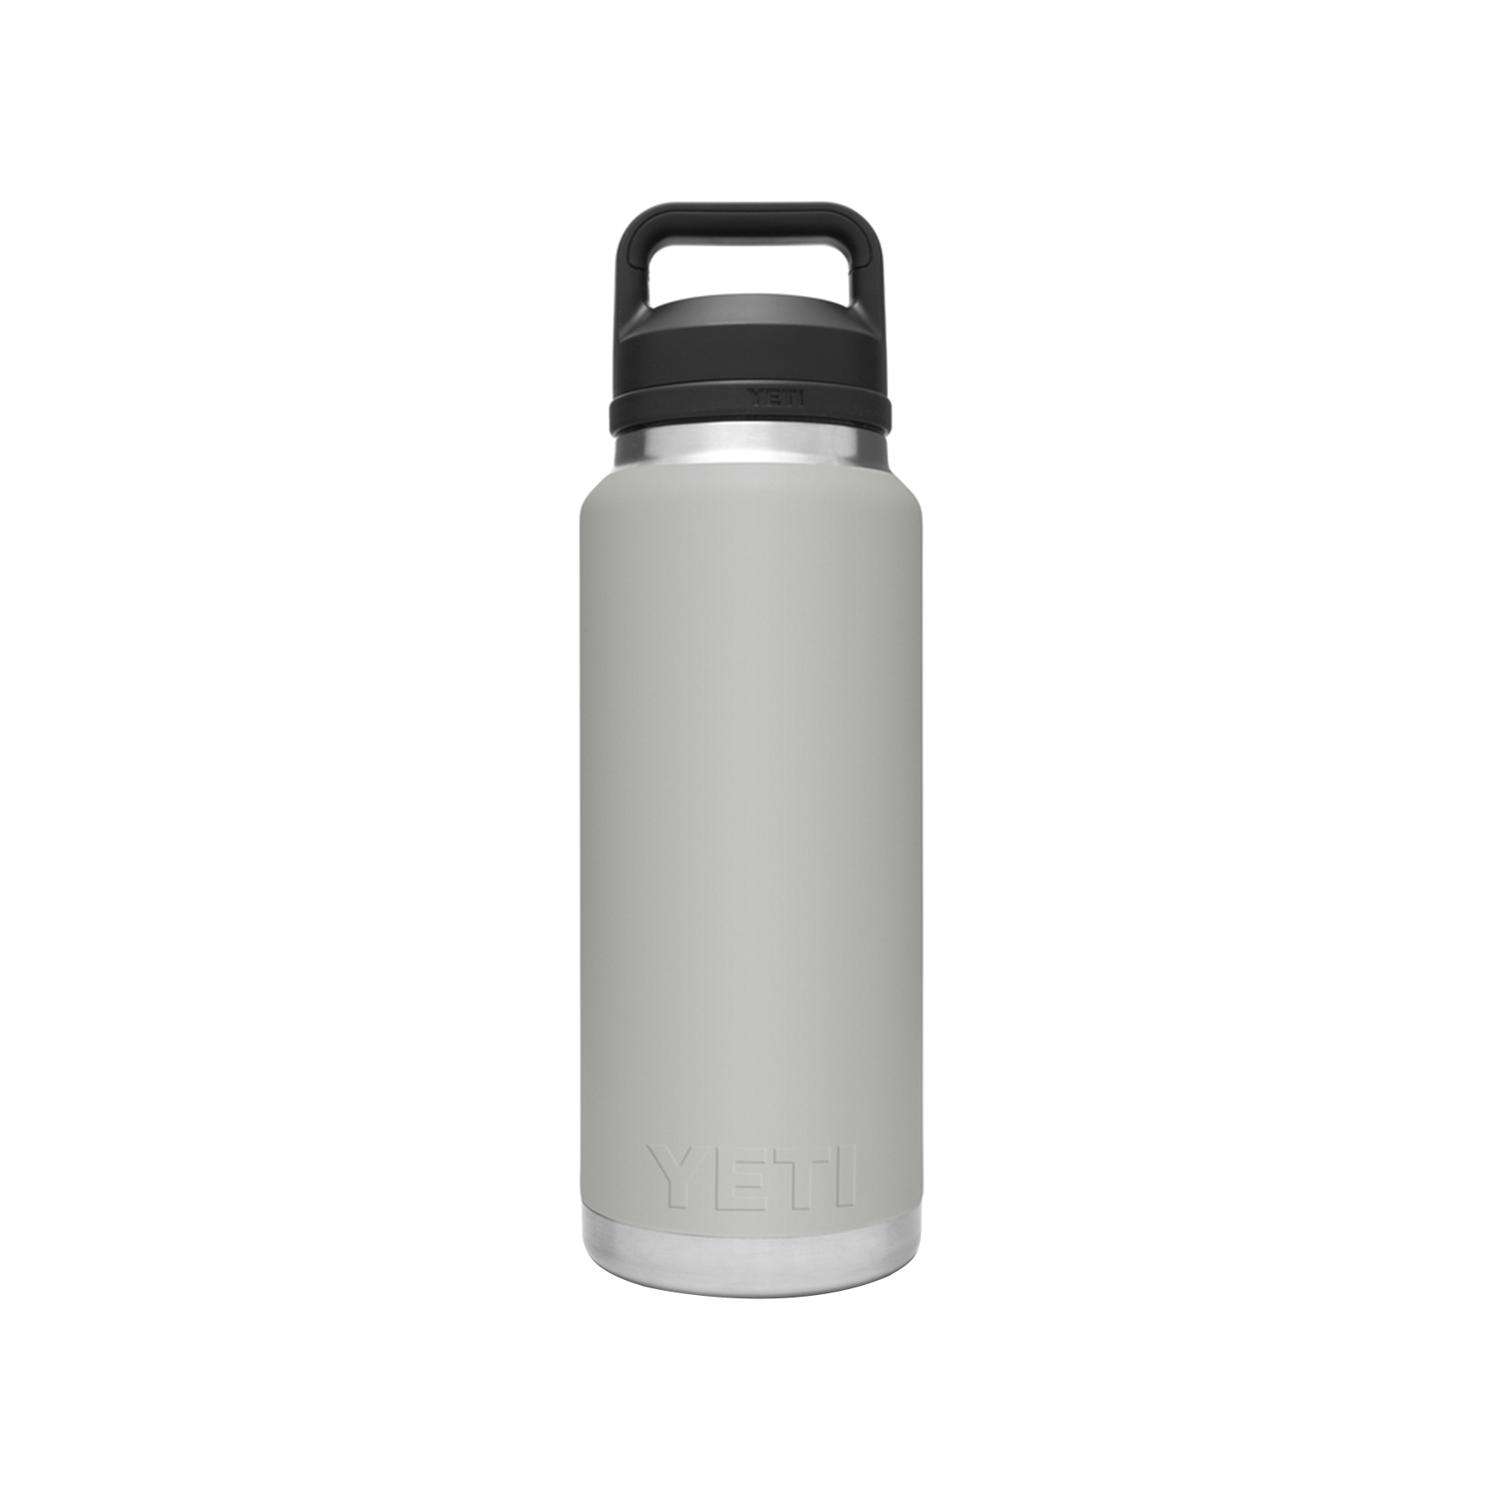 YETI Rambler 36 oz Bottle Retired Color, Vacuum Insulated, Stainless Steel  with Chug Cap, Granite Gray